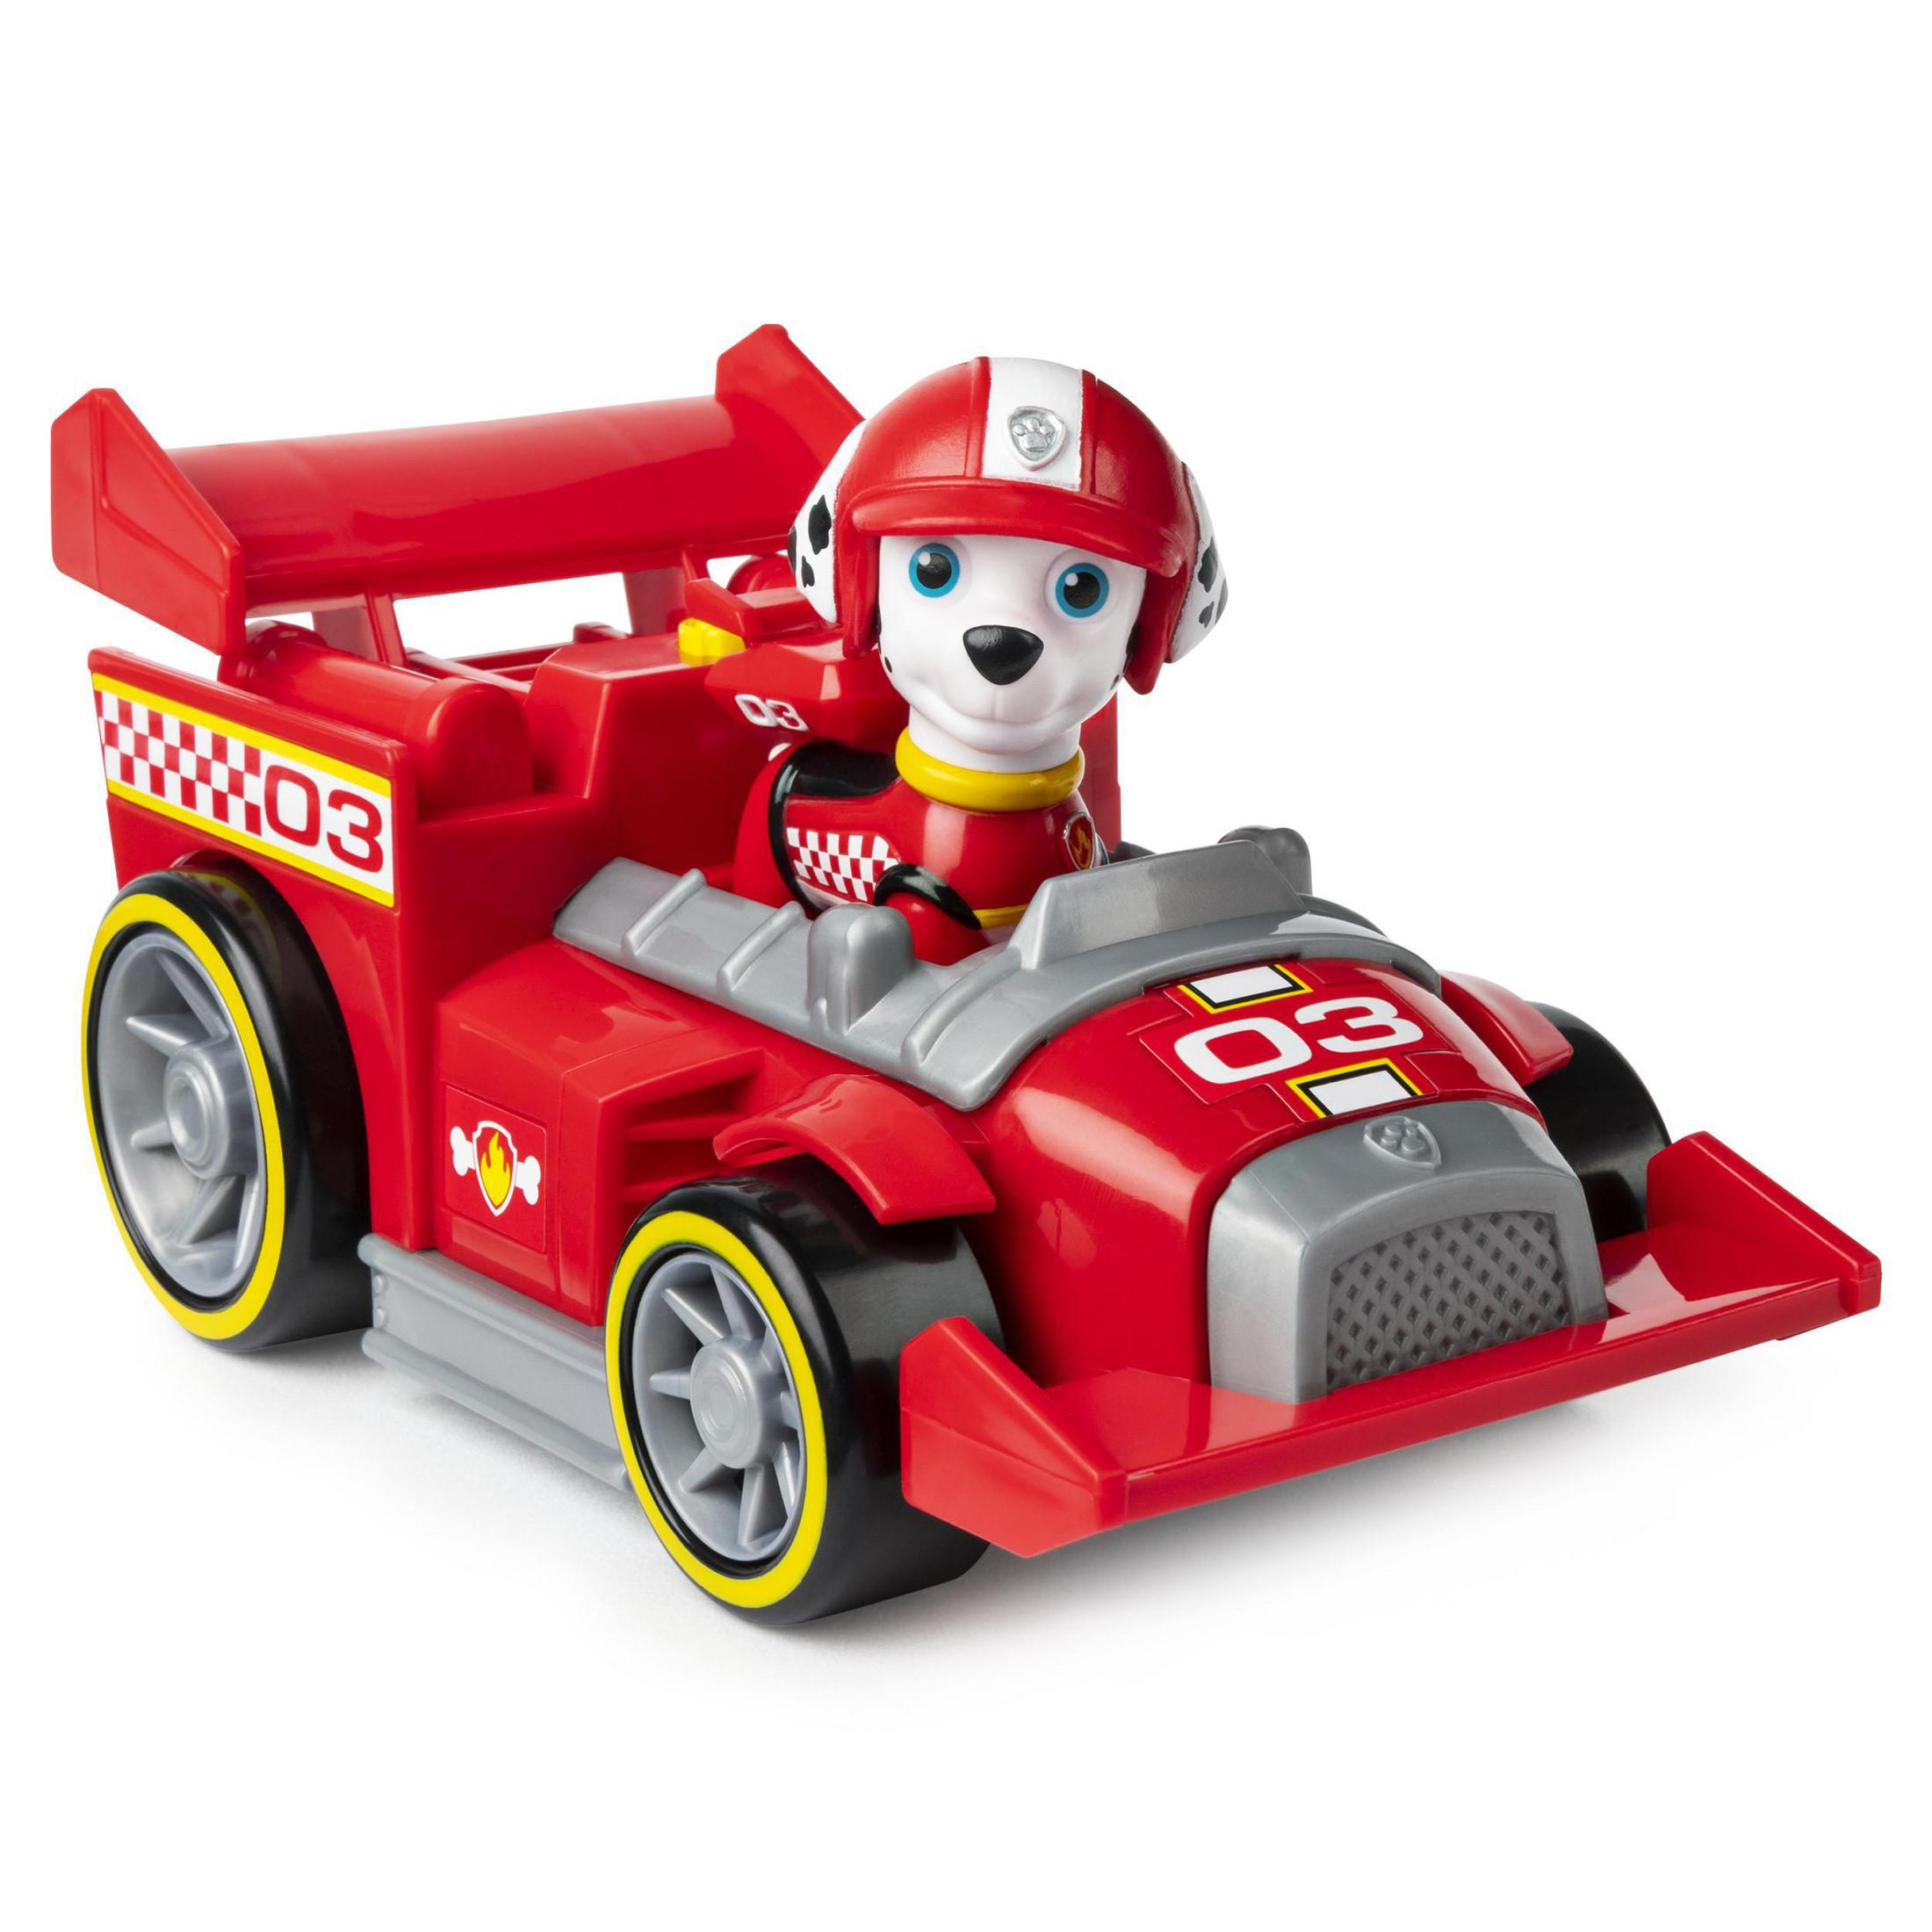 THEMED Mehrfarbig Spielset VEHICLE 28190 SPIN MARSHALL MASTER PAW R,R,R